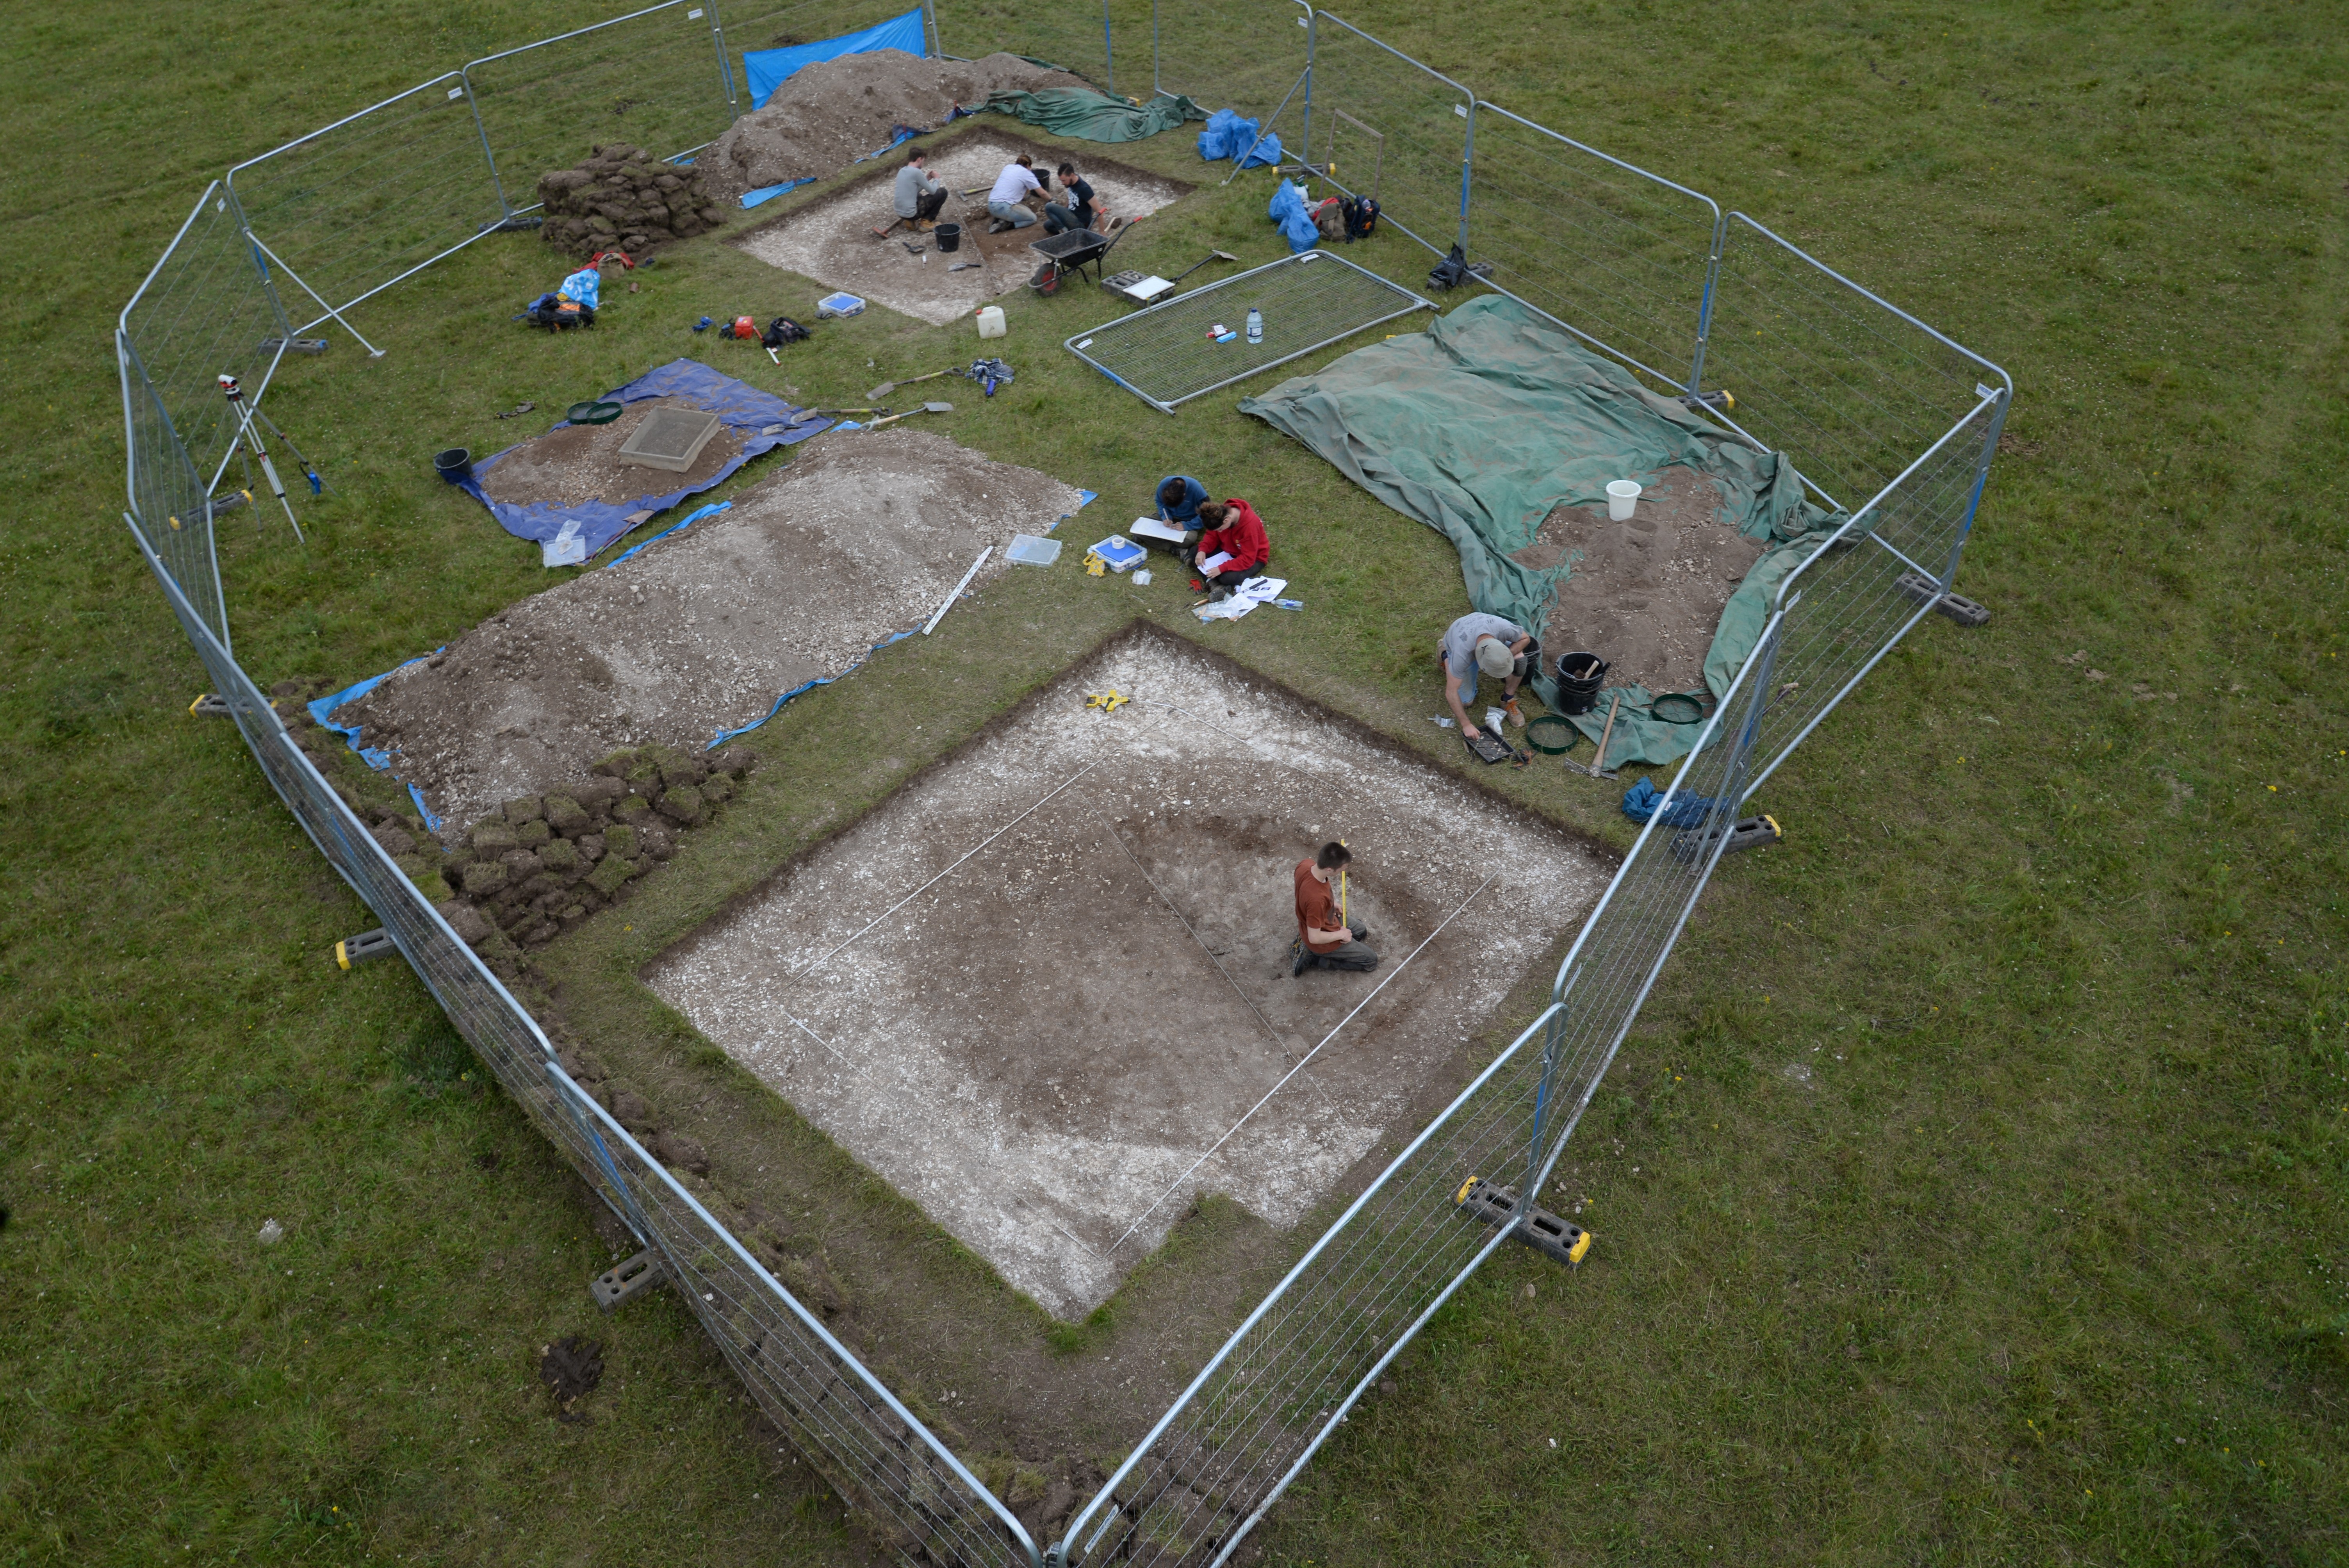 Scientists work on the excavation site at Stonehenge